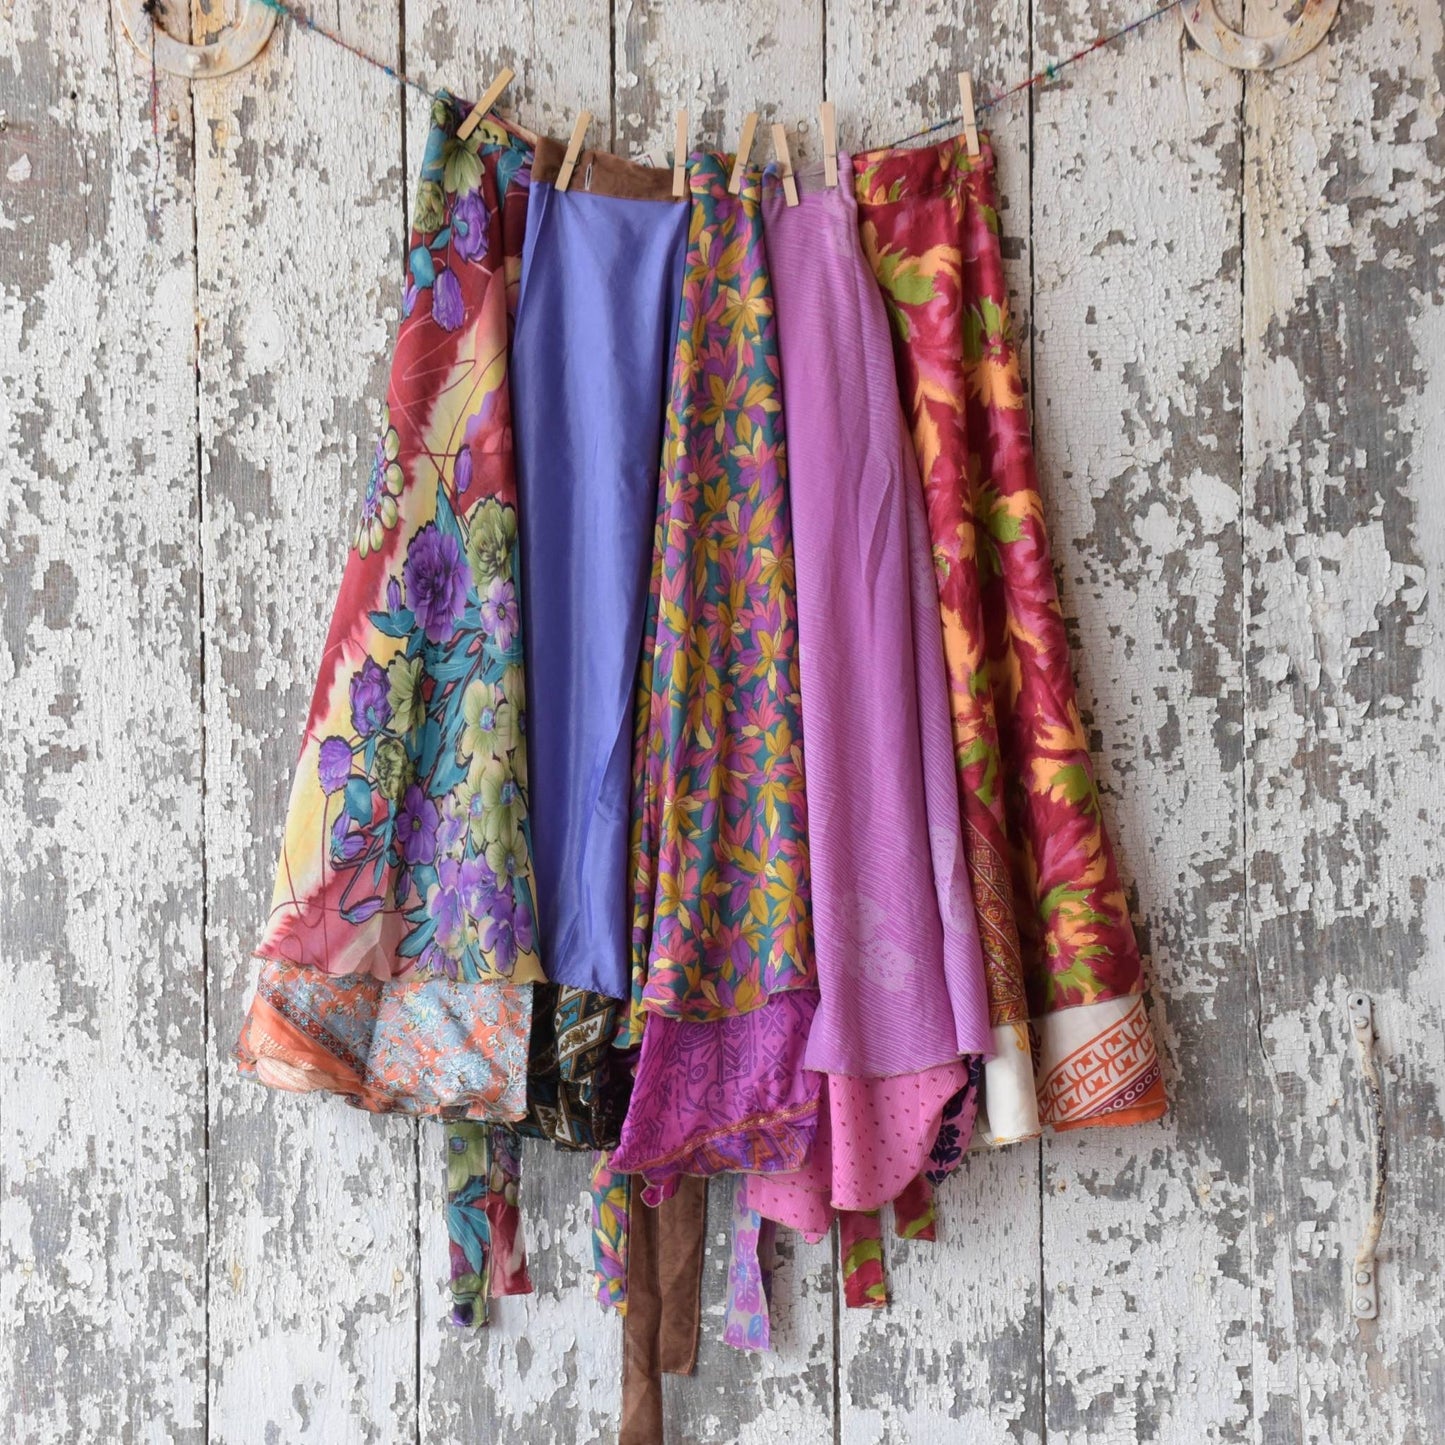 Colorful assortment of Sari wrap skirts hanging on a clothesline on a rustic wall.